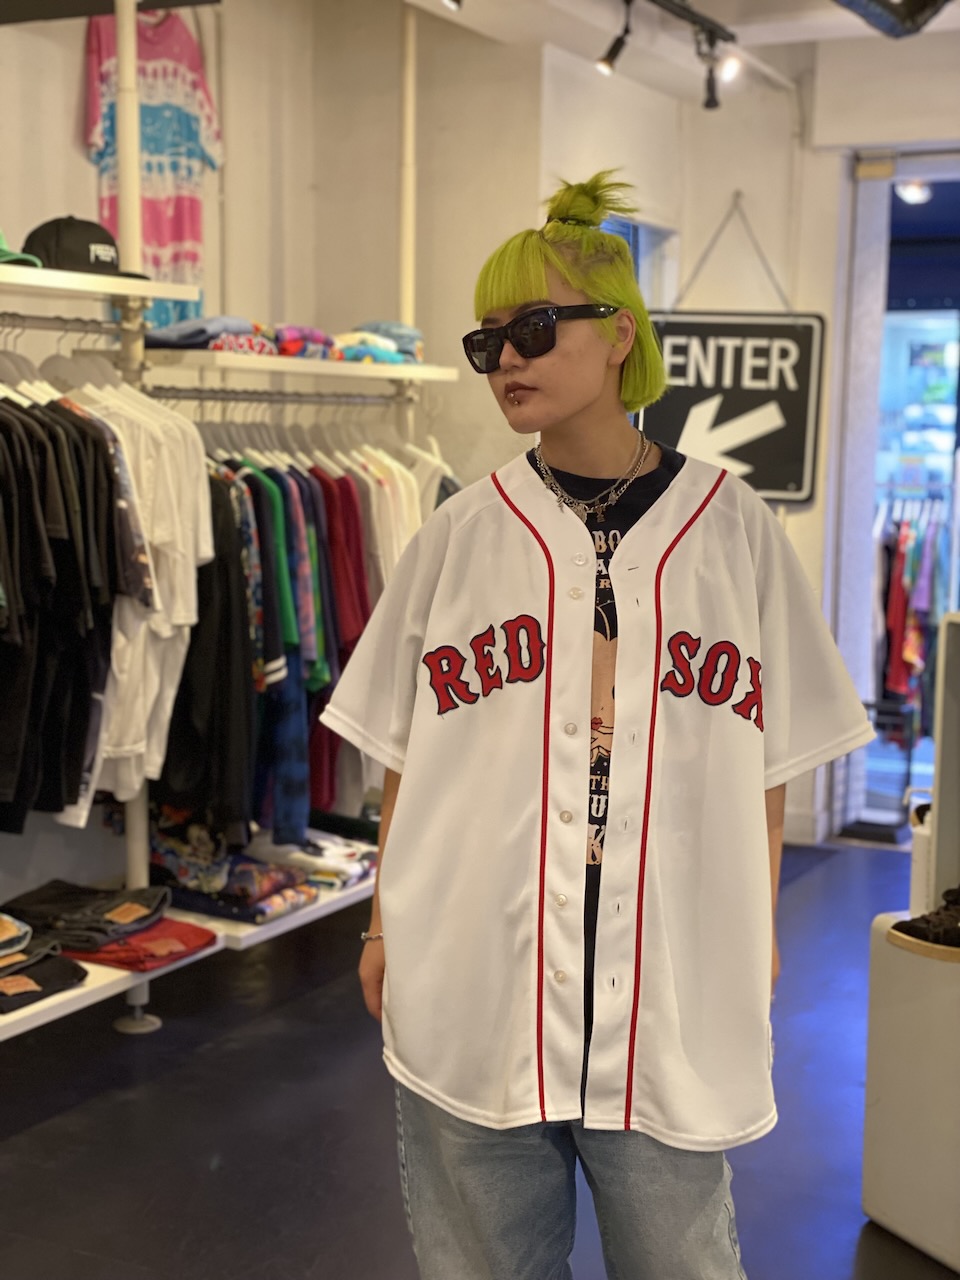 Red Sox style